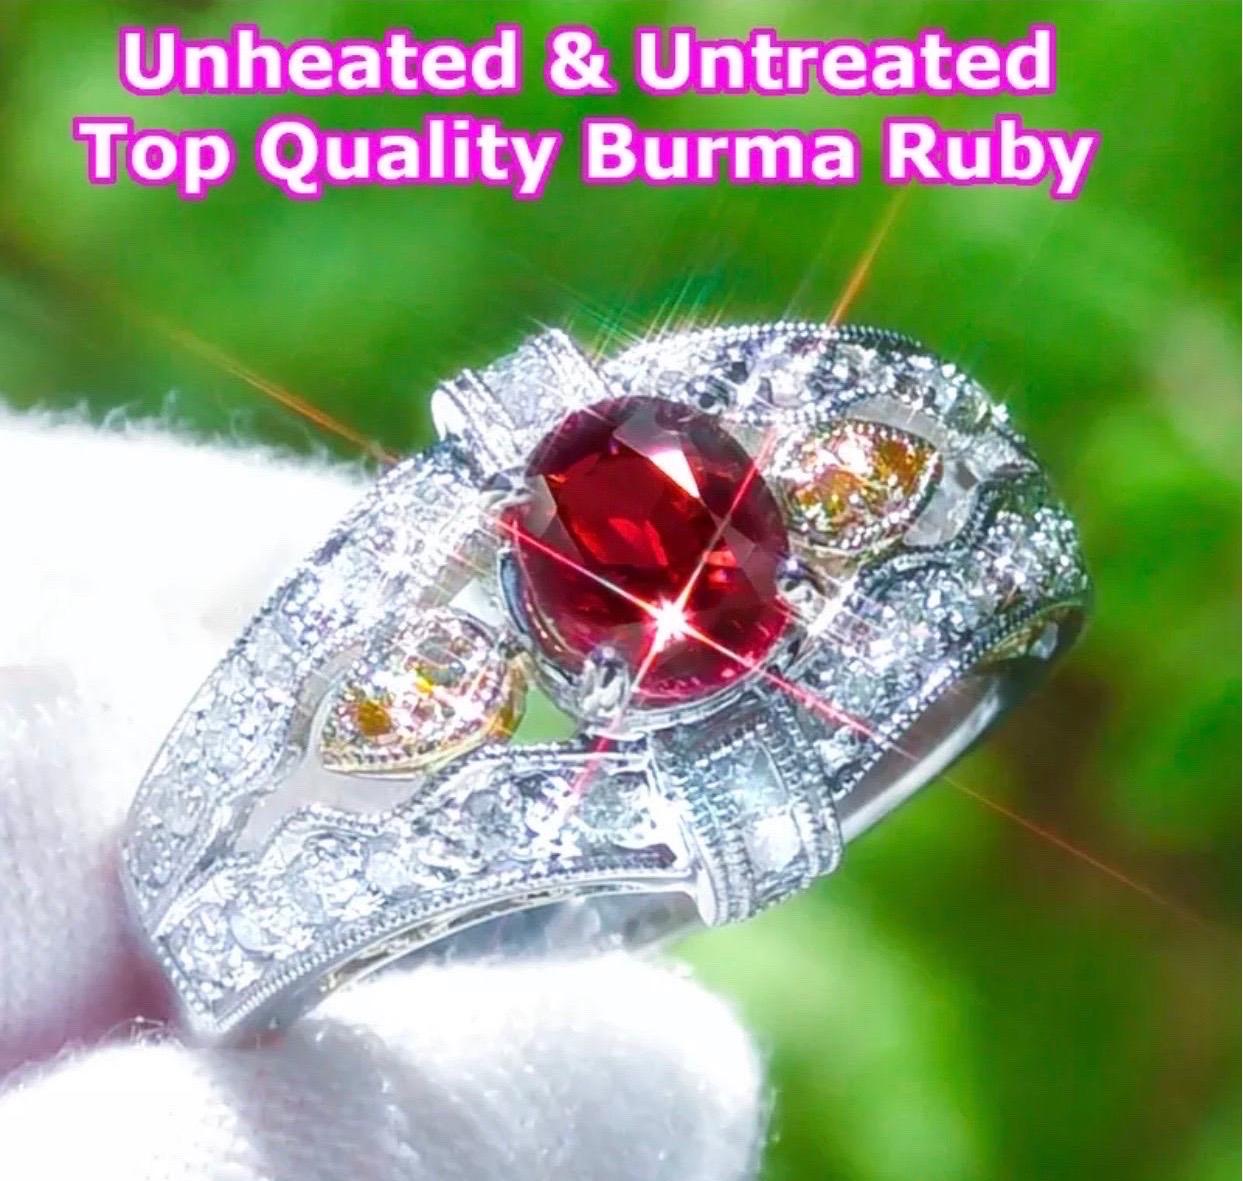 Certified Vintage 2.38 No Heat Burma Ruby Carat Art Deco Style Diamond Ring In Excellent Condition For Sale In Miami, FL